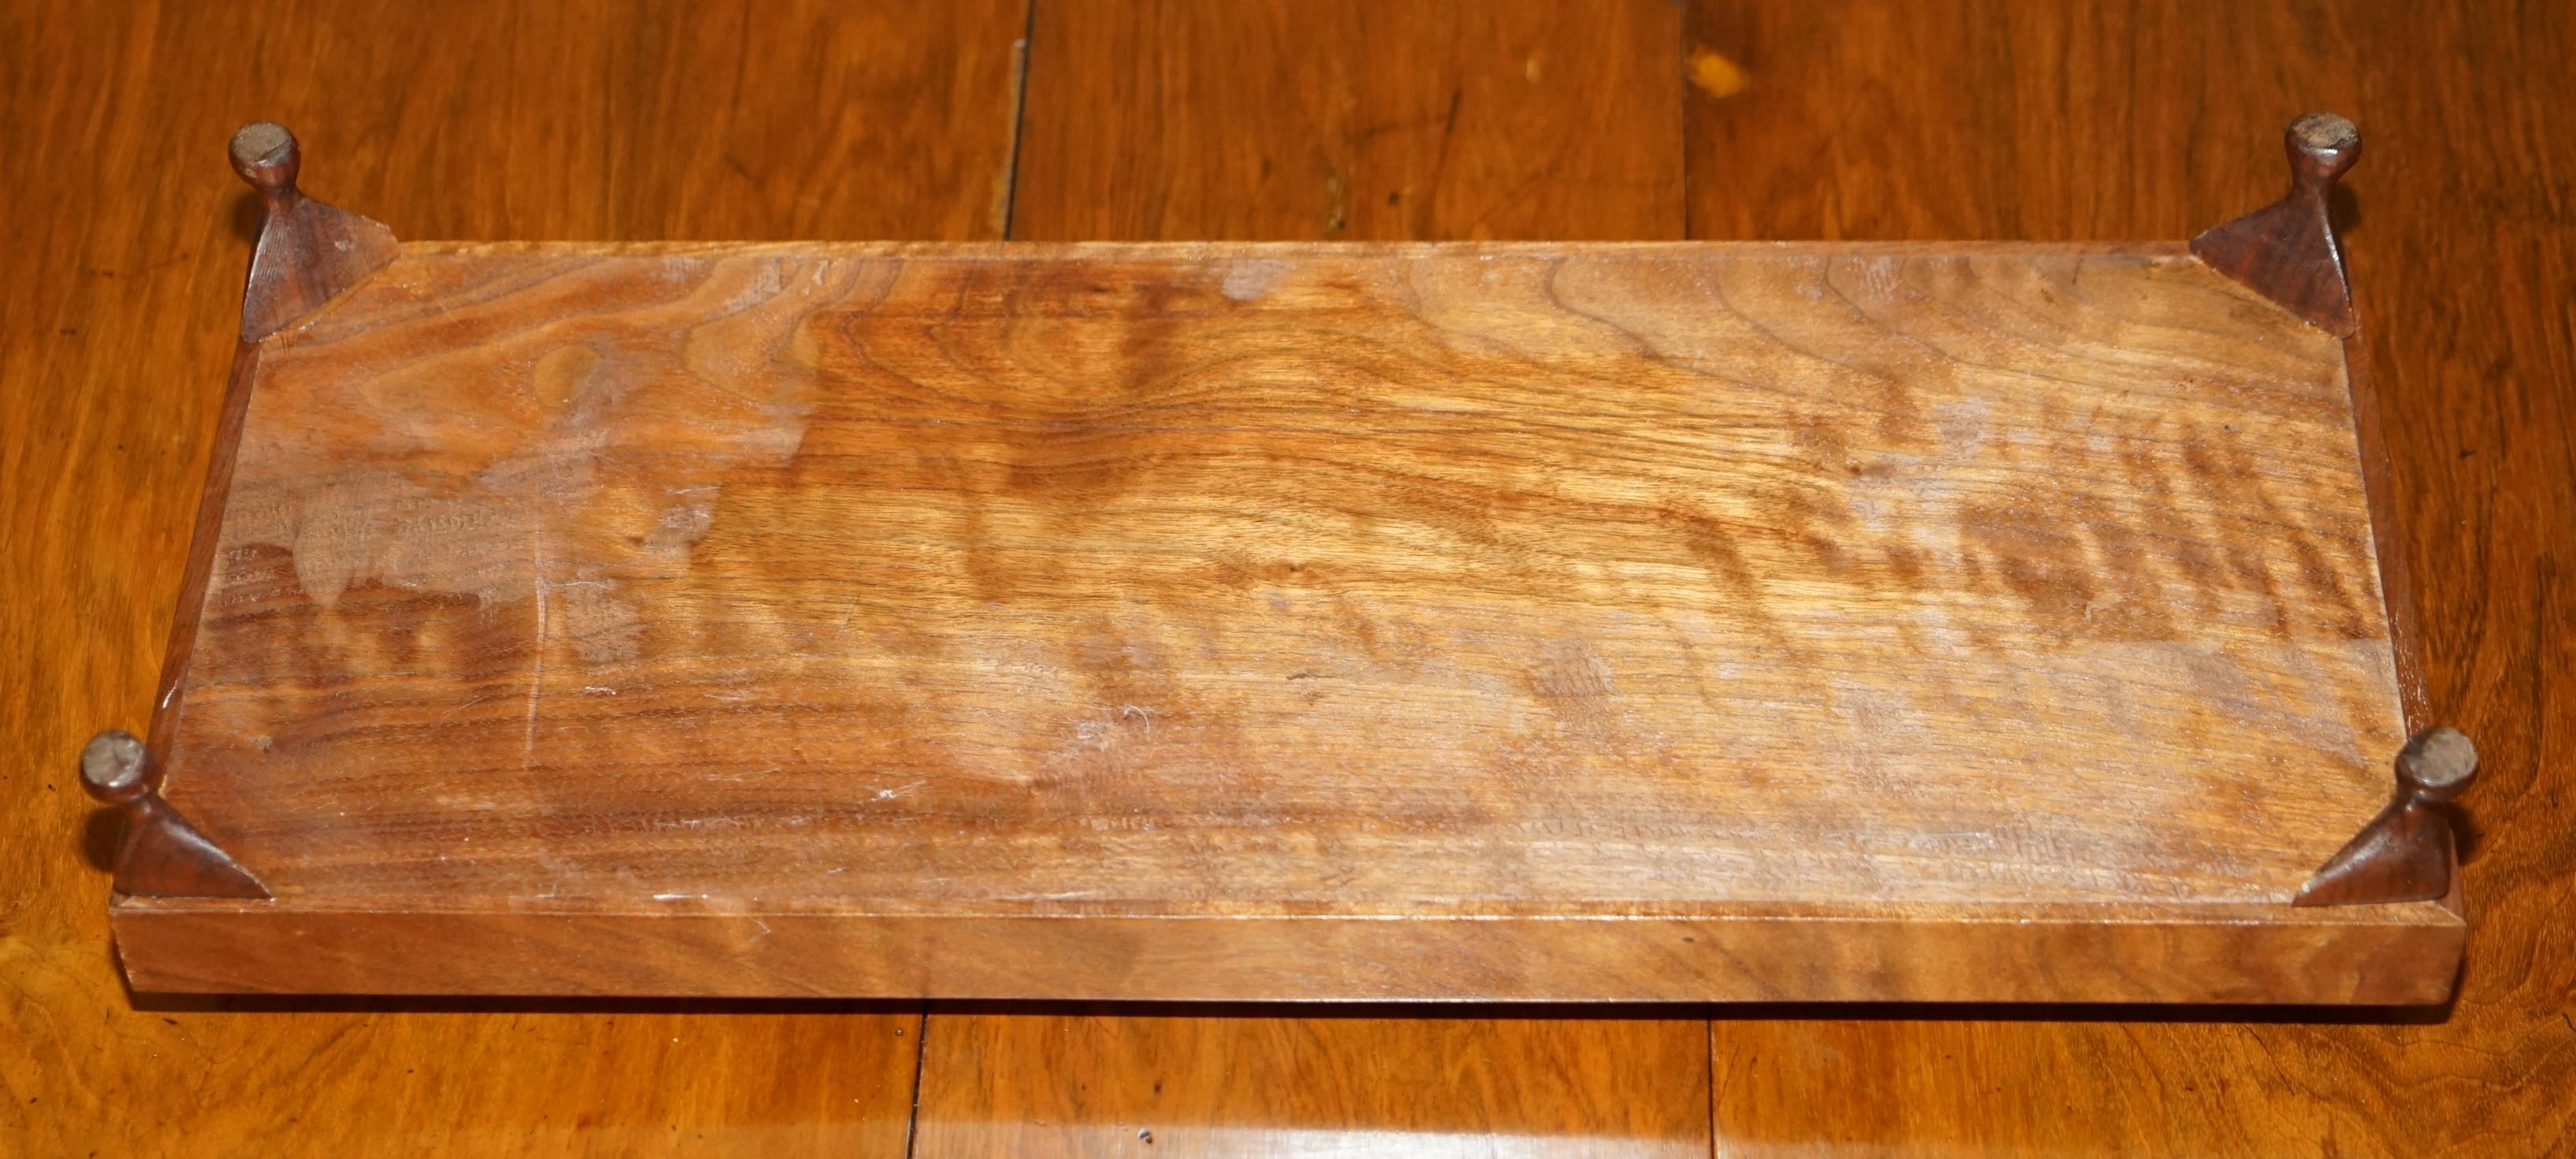 Lovely Decorative Vintage Hardwood Small Serving Tray with Tiny Cabriole Legs For Sale 1